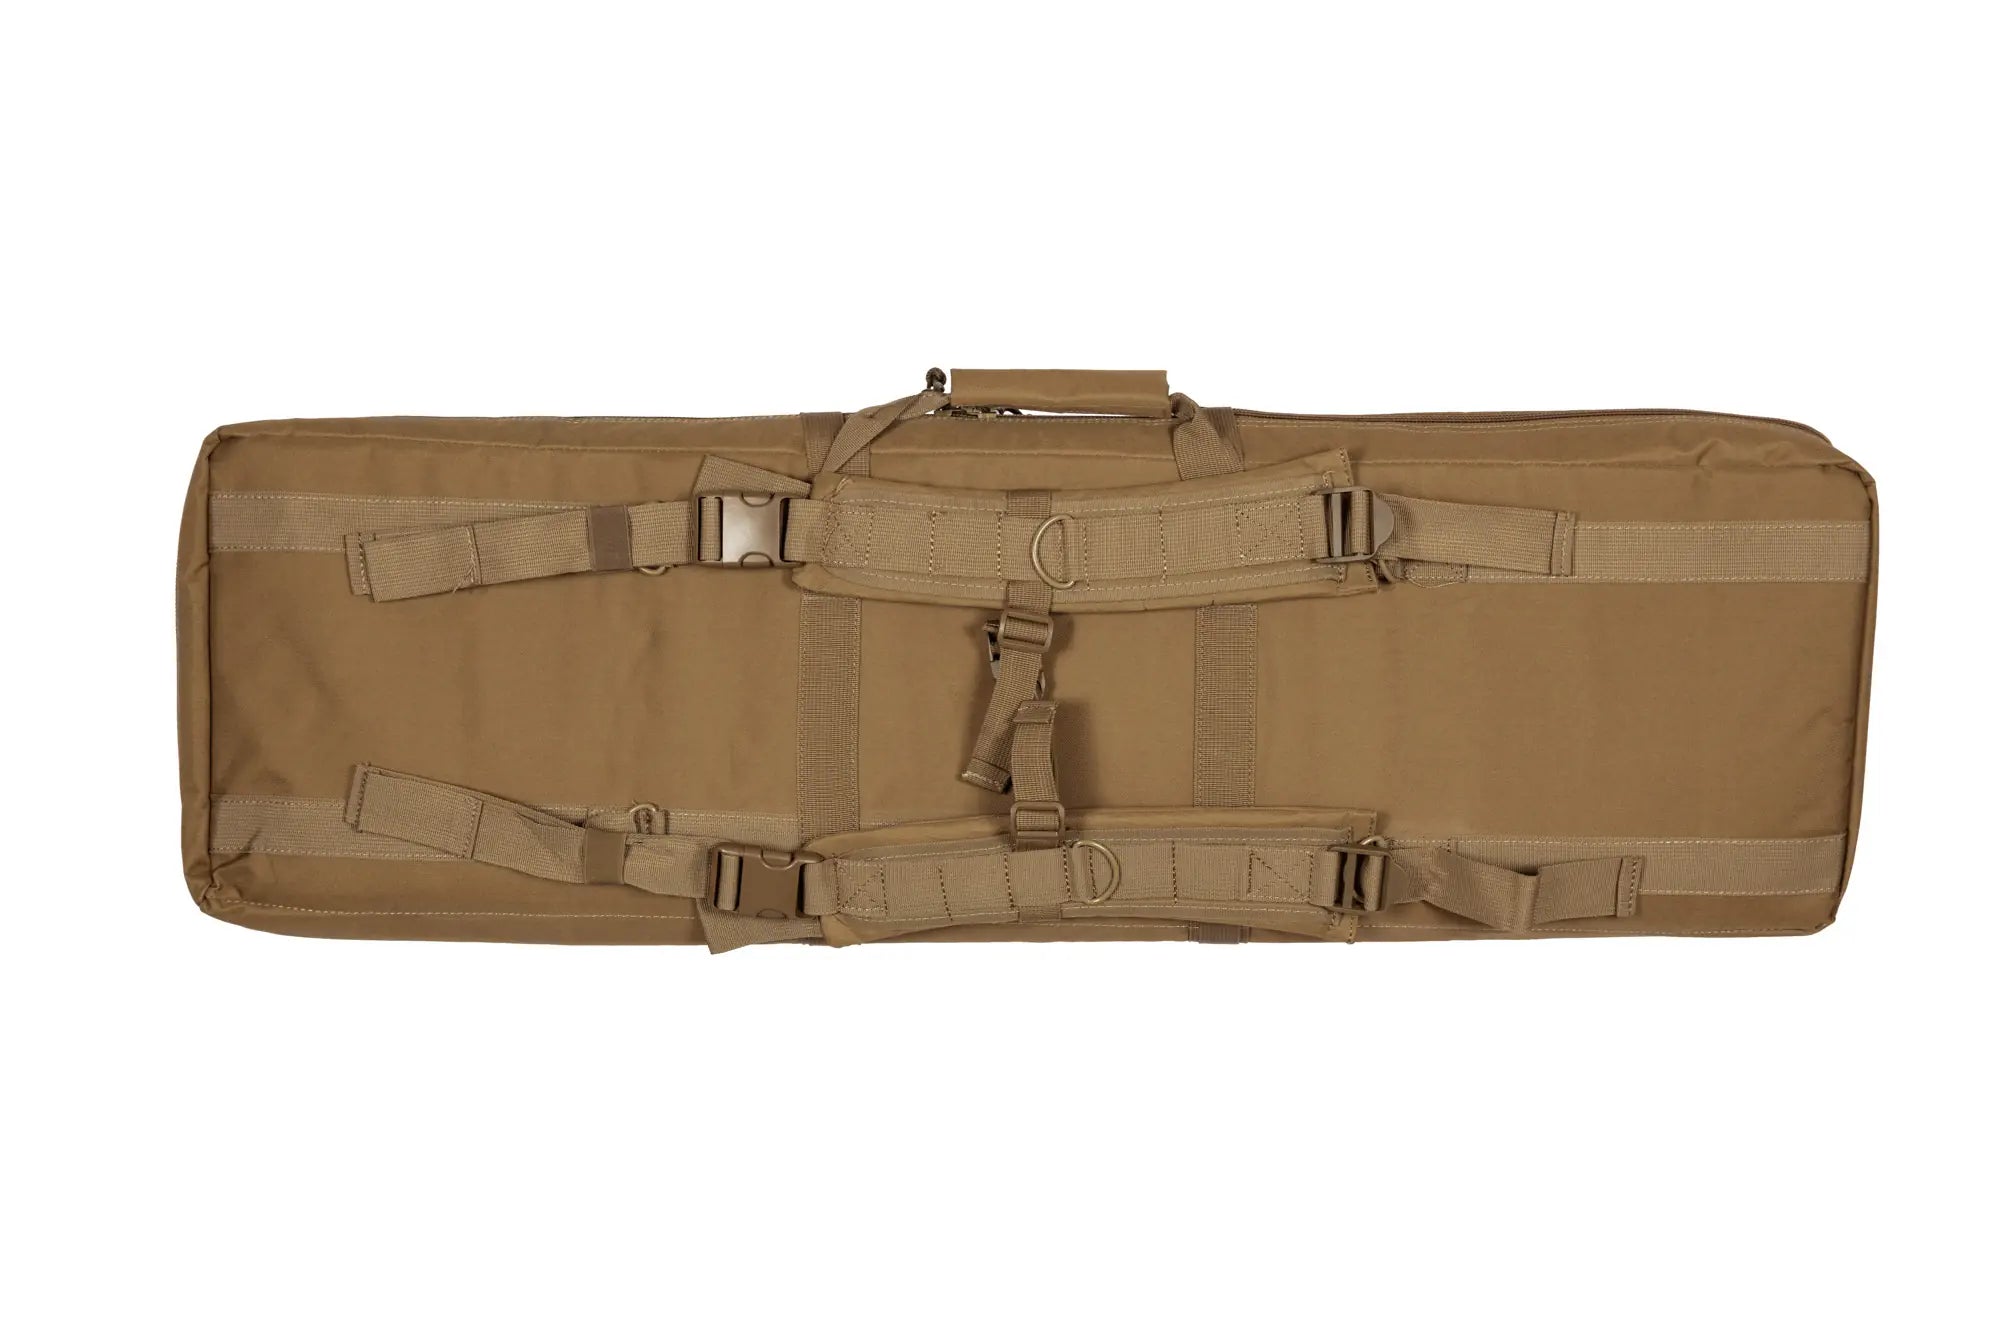 NP PMC Deluxe Soft Double Rifle Bag 42 - Tan"-1